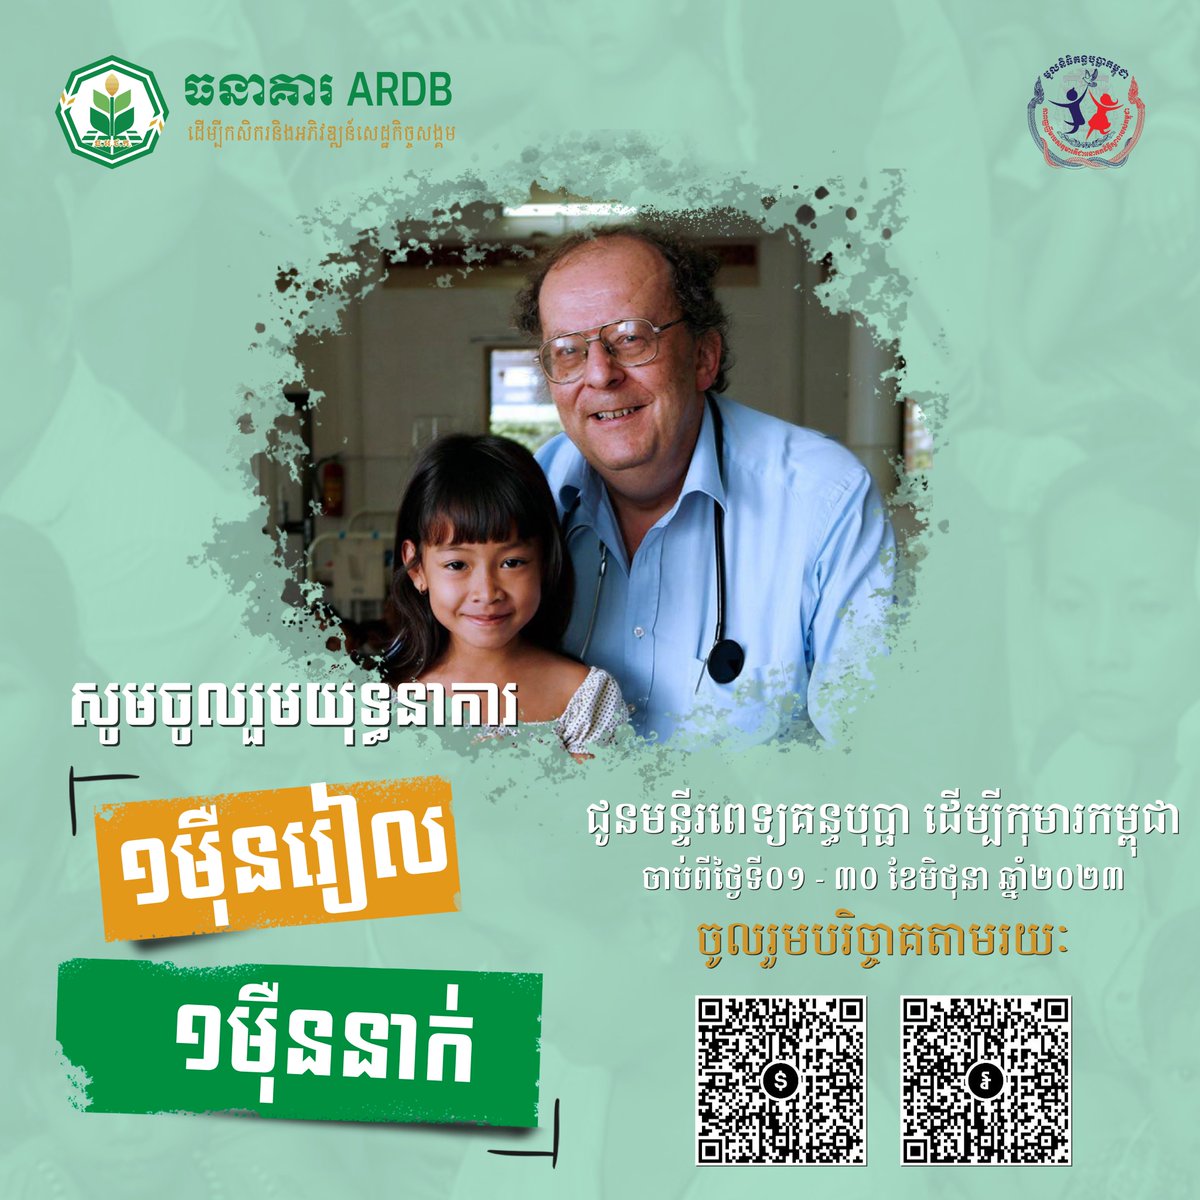 During this International Children’s Day, please join us by donating to support the Kantha Bopha Hospital's operational sustainability in the national campaign: '10,000 Riels by 10,000 Donors'
pls Scan KHQR or through Bank Account: (KHR) 1020000370 or (USD) 2020002931